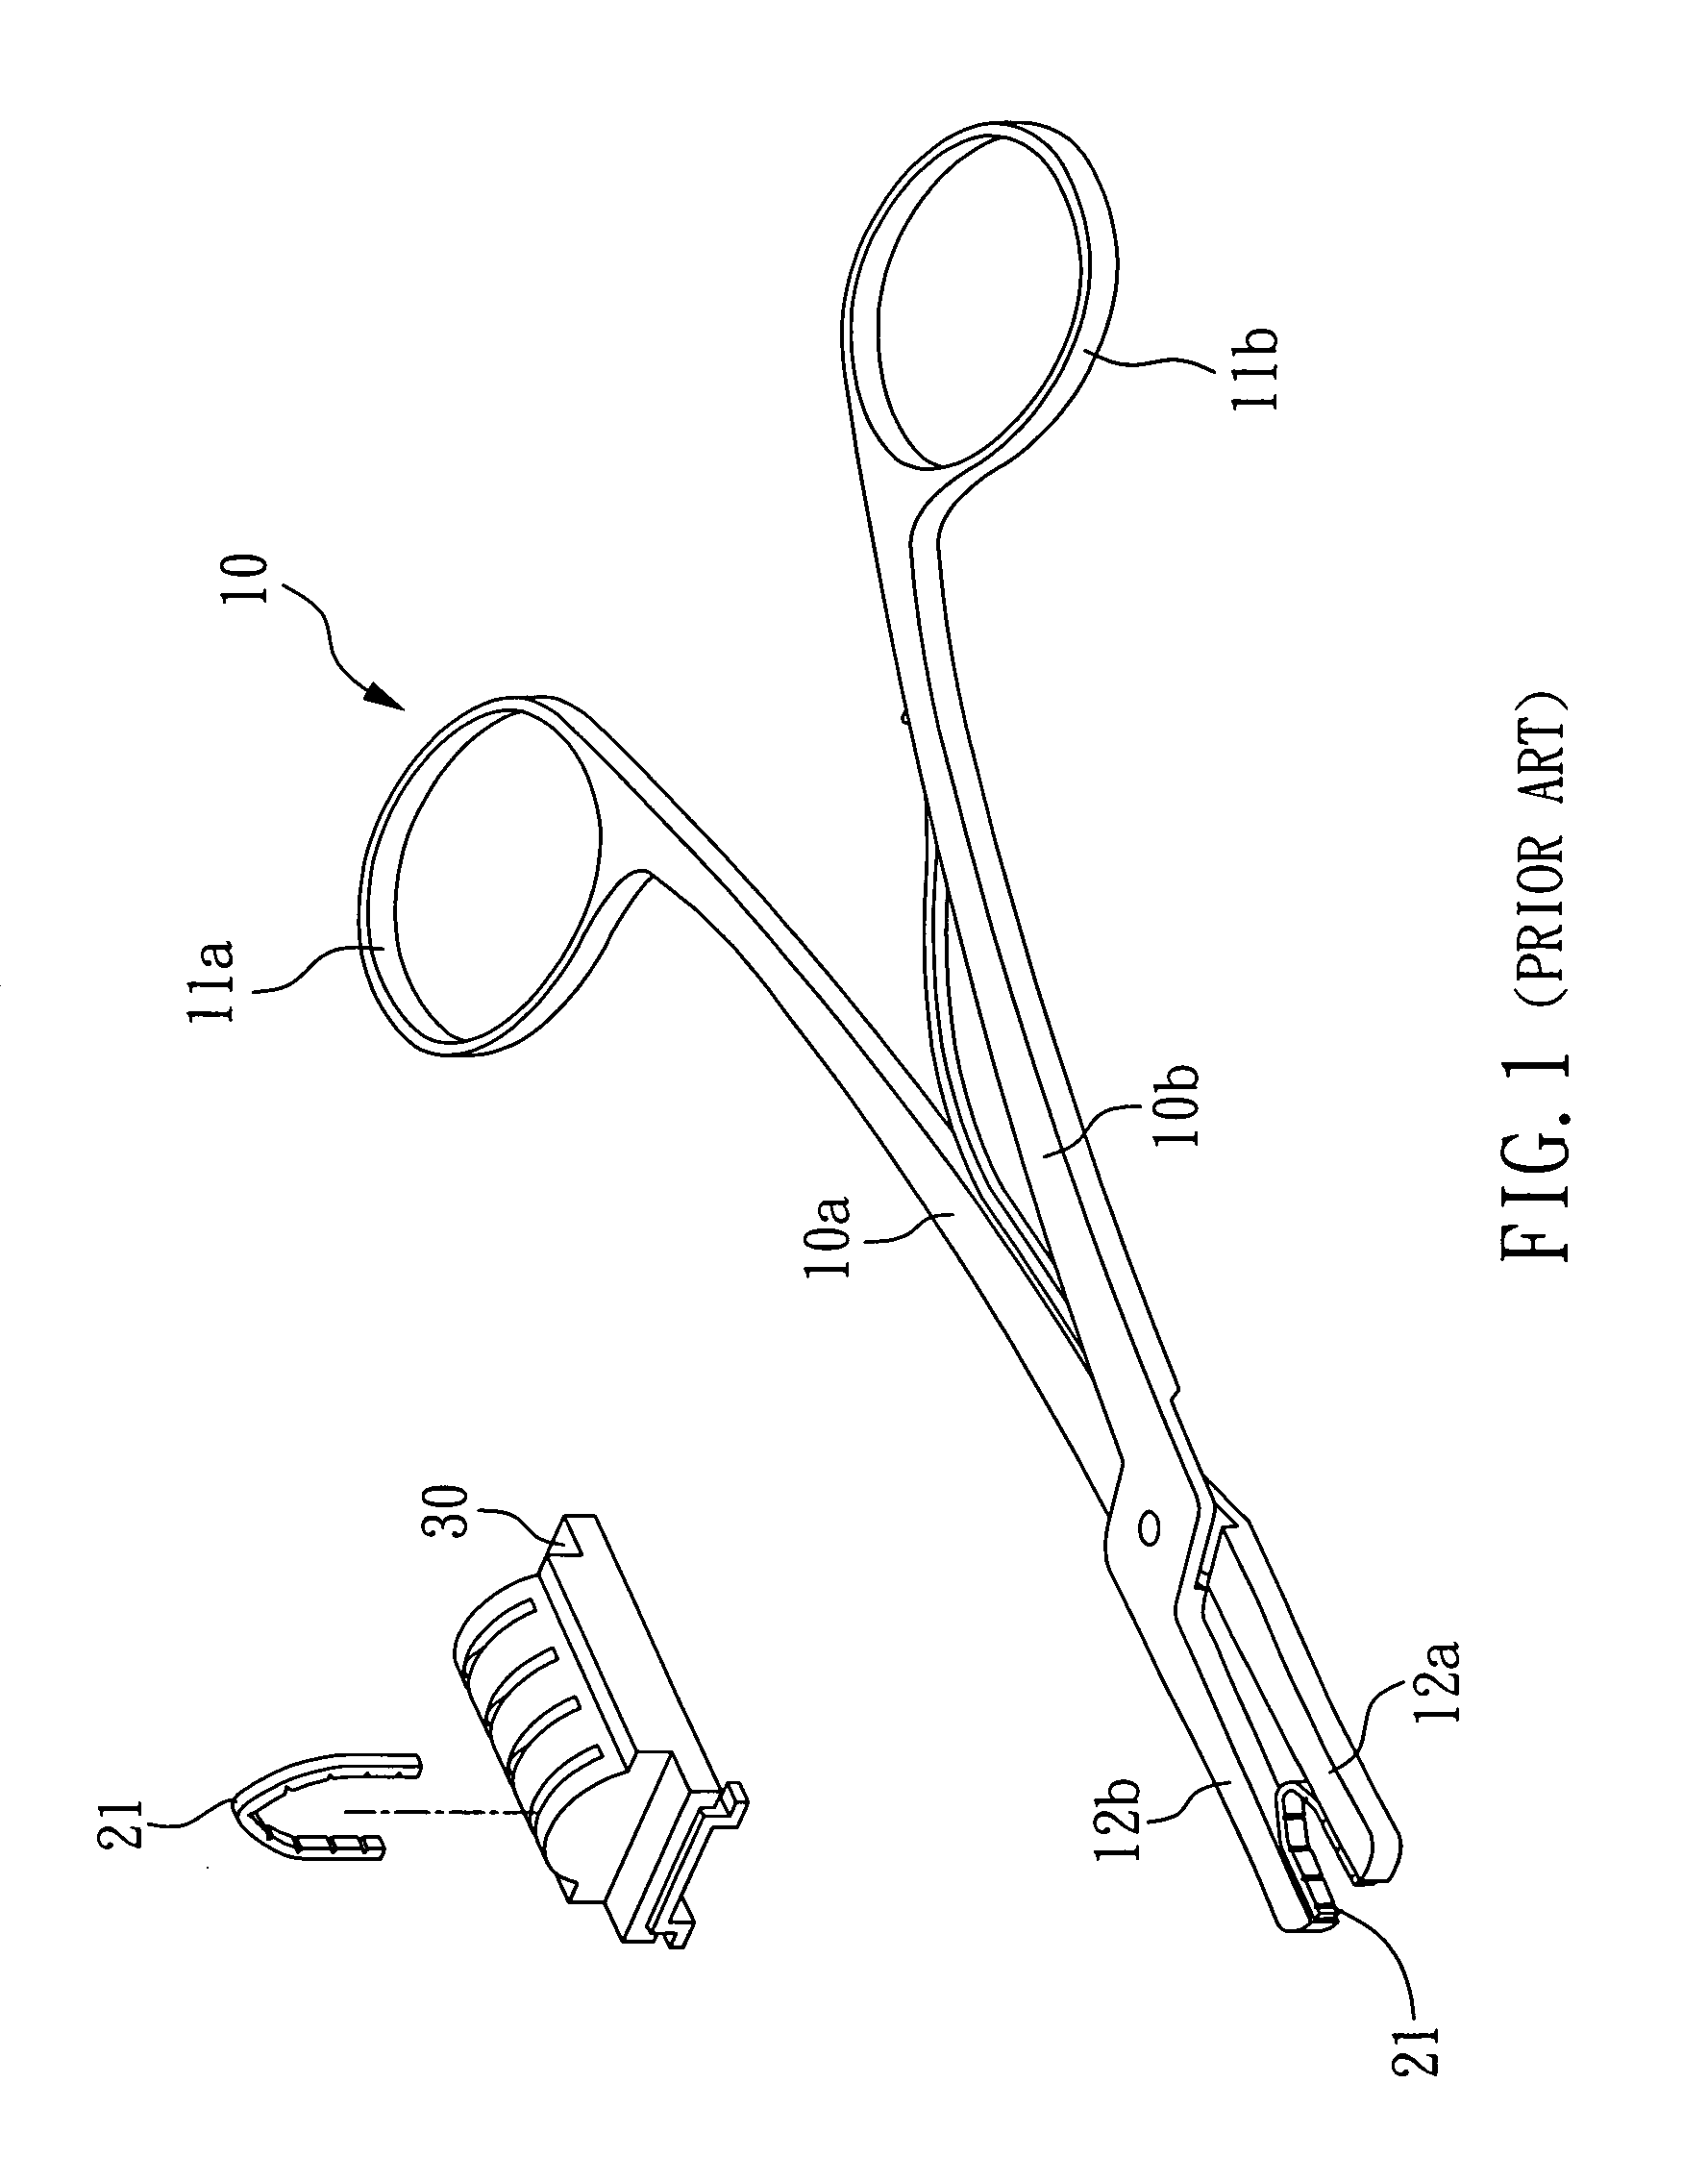 Integrated double clips applier with division device for clamping clips